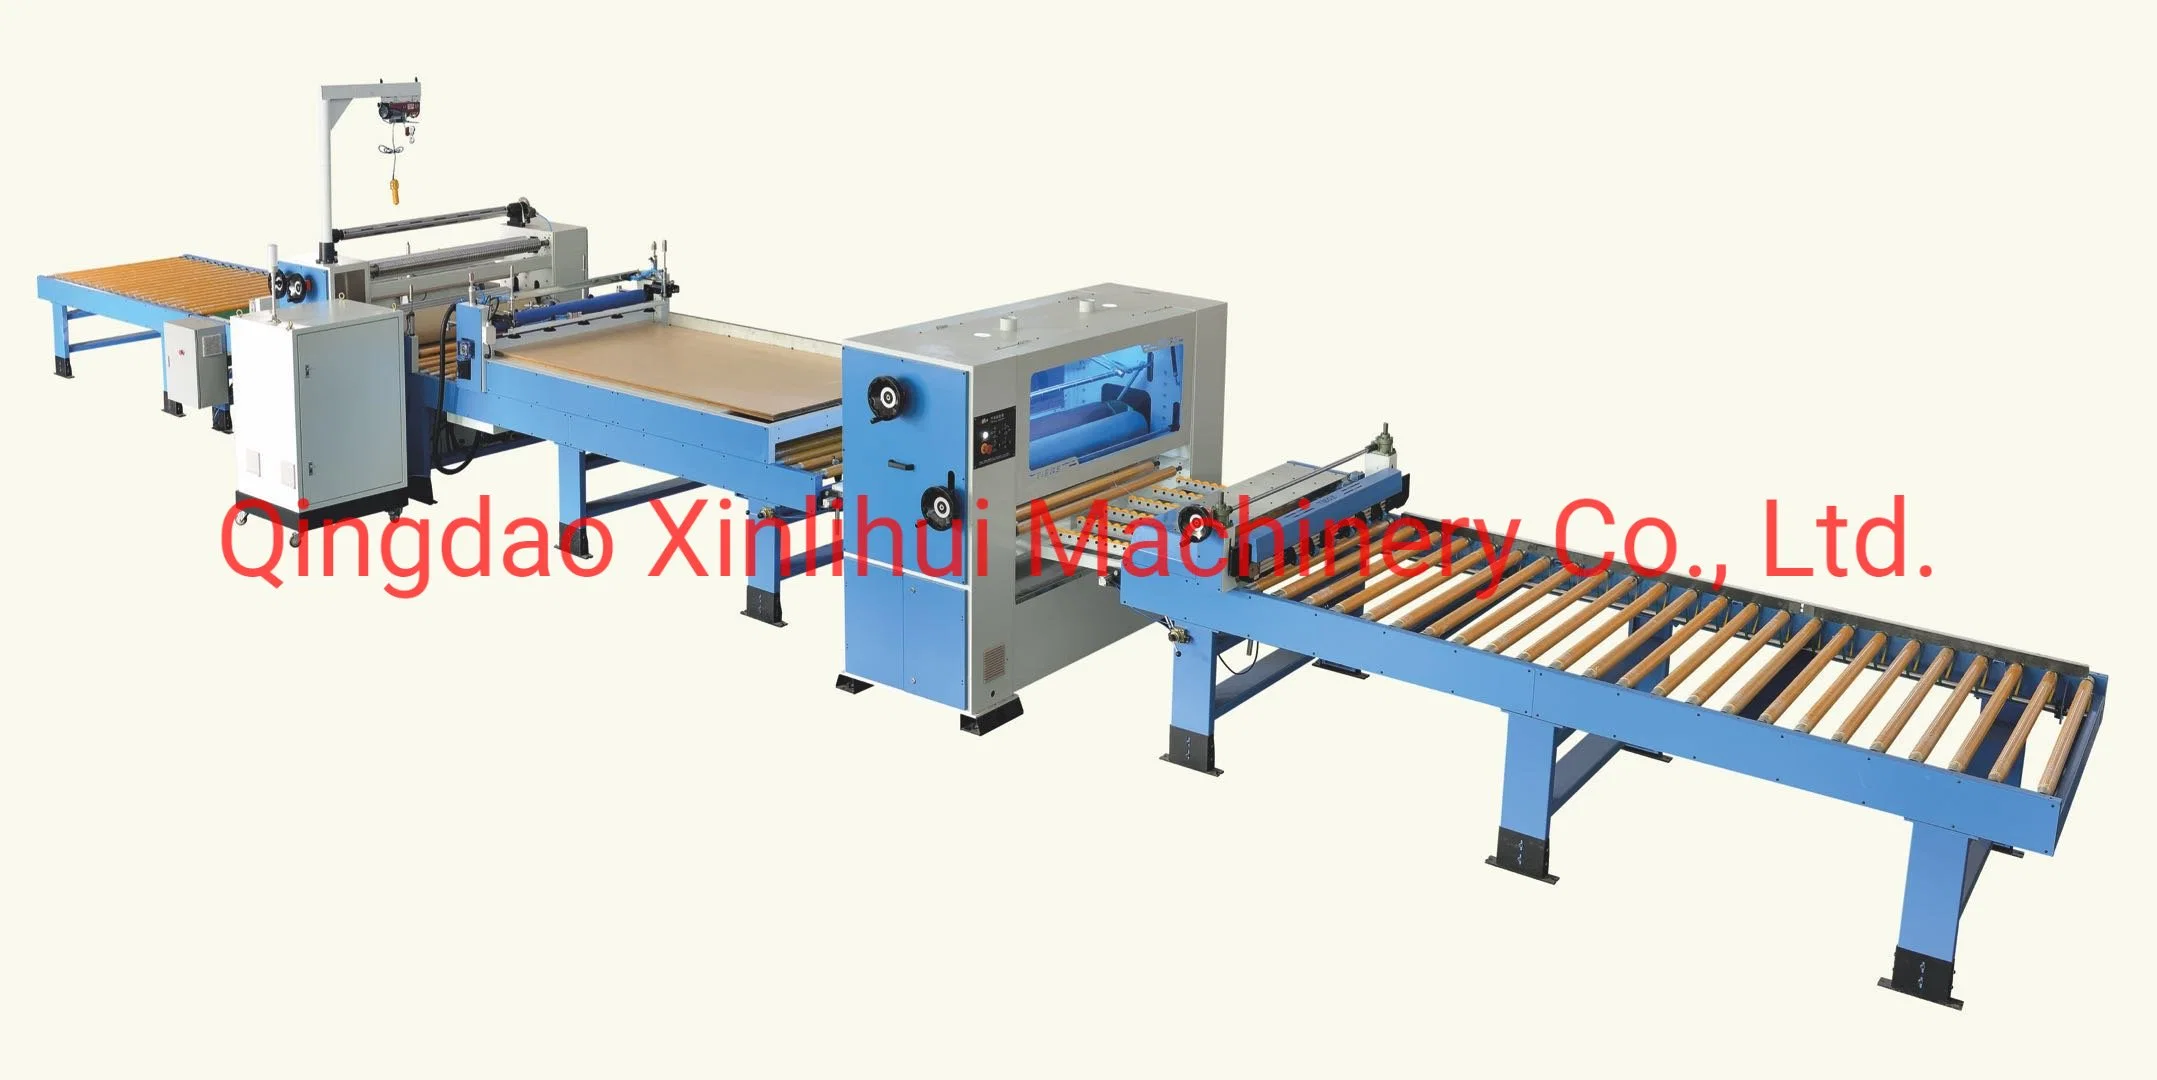 Moulded Door Skin Hot Press Machine, for Laminating Melamine Door Skin, Veneer Door Skin and Primer Door Skin. The Raw Material Is HDF 4 or 5 Levels